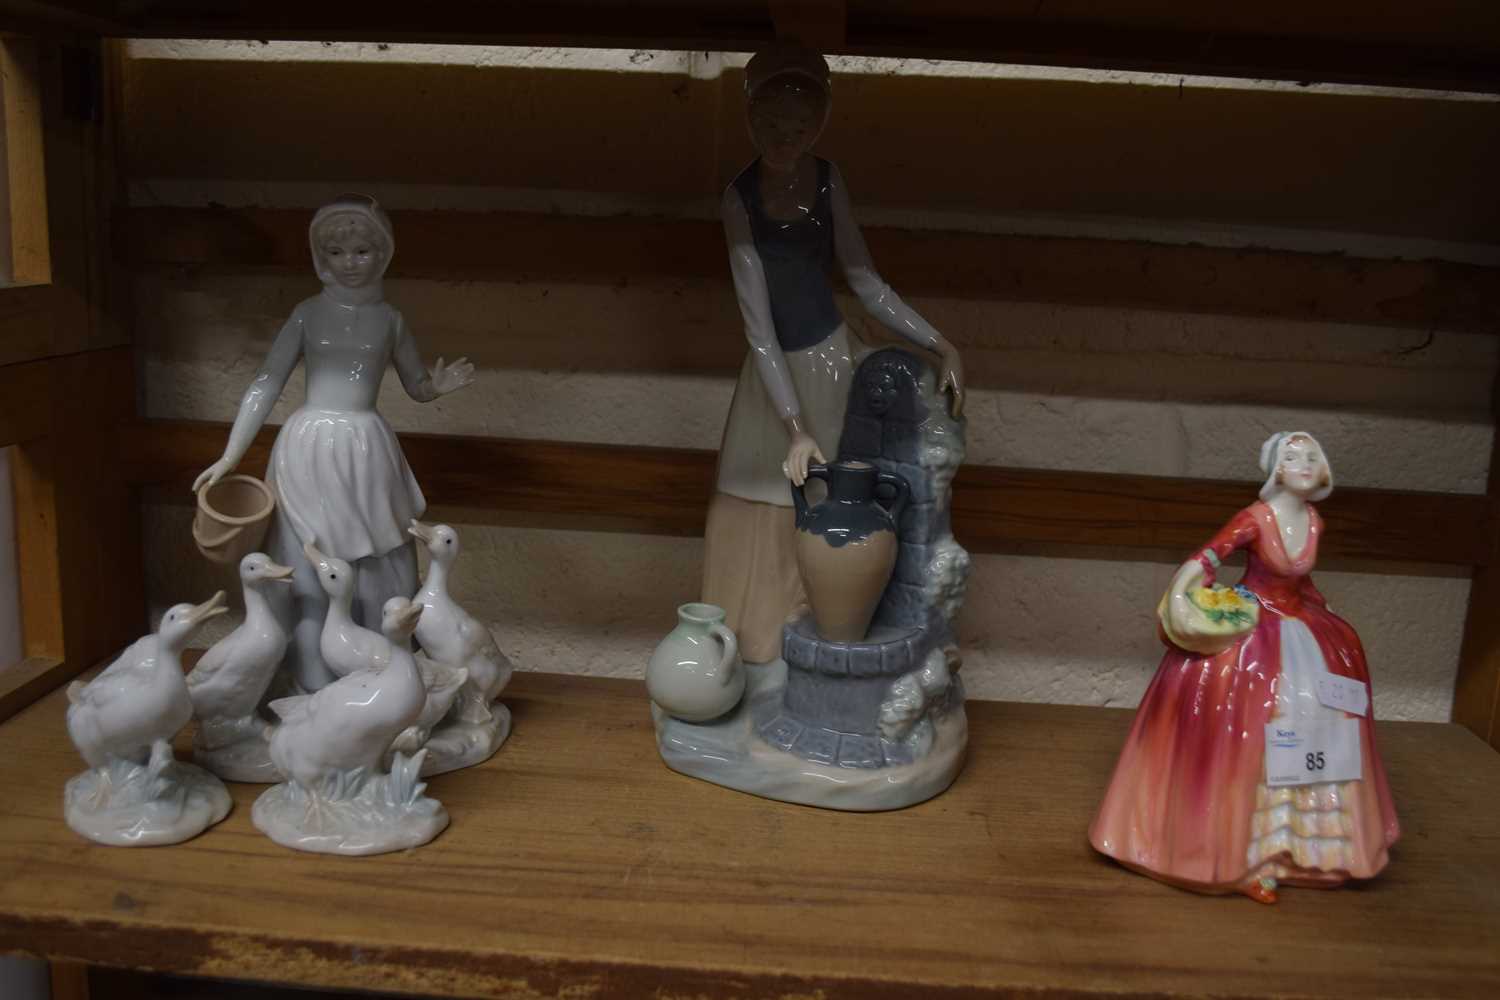 ROYAL DOULTON FIGURINE 'JANET', TOGETHER WITH A FURTHER NAO FIGURINE PLUS A FURTHER LLADRO STYLE